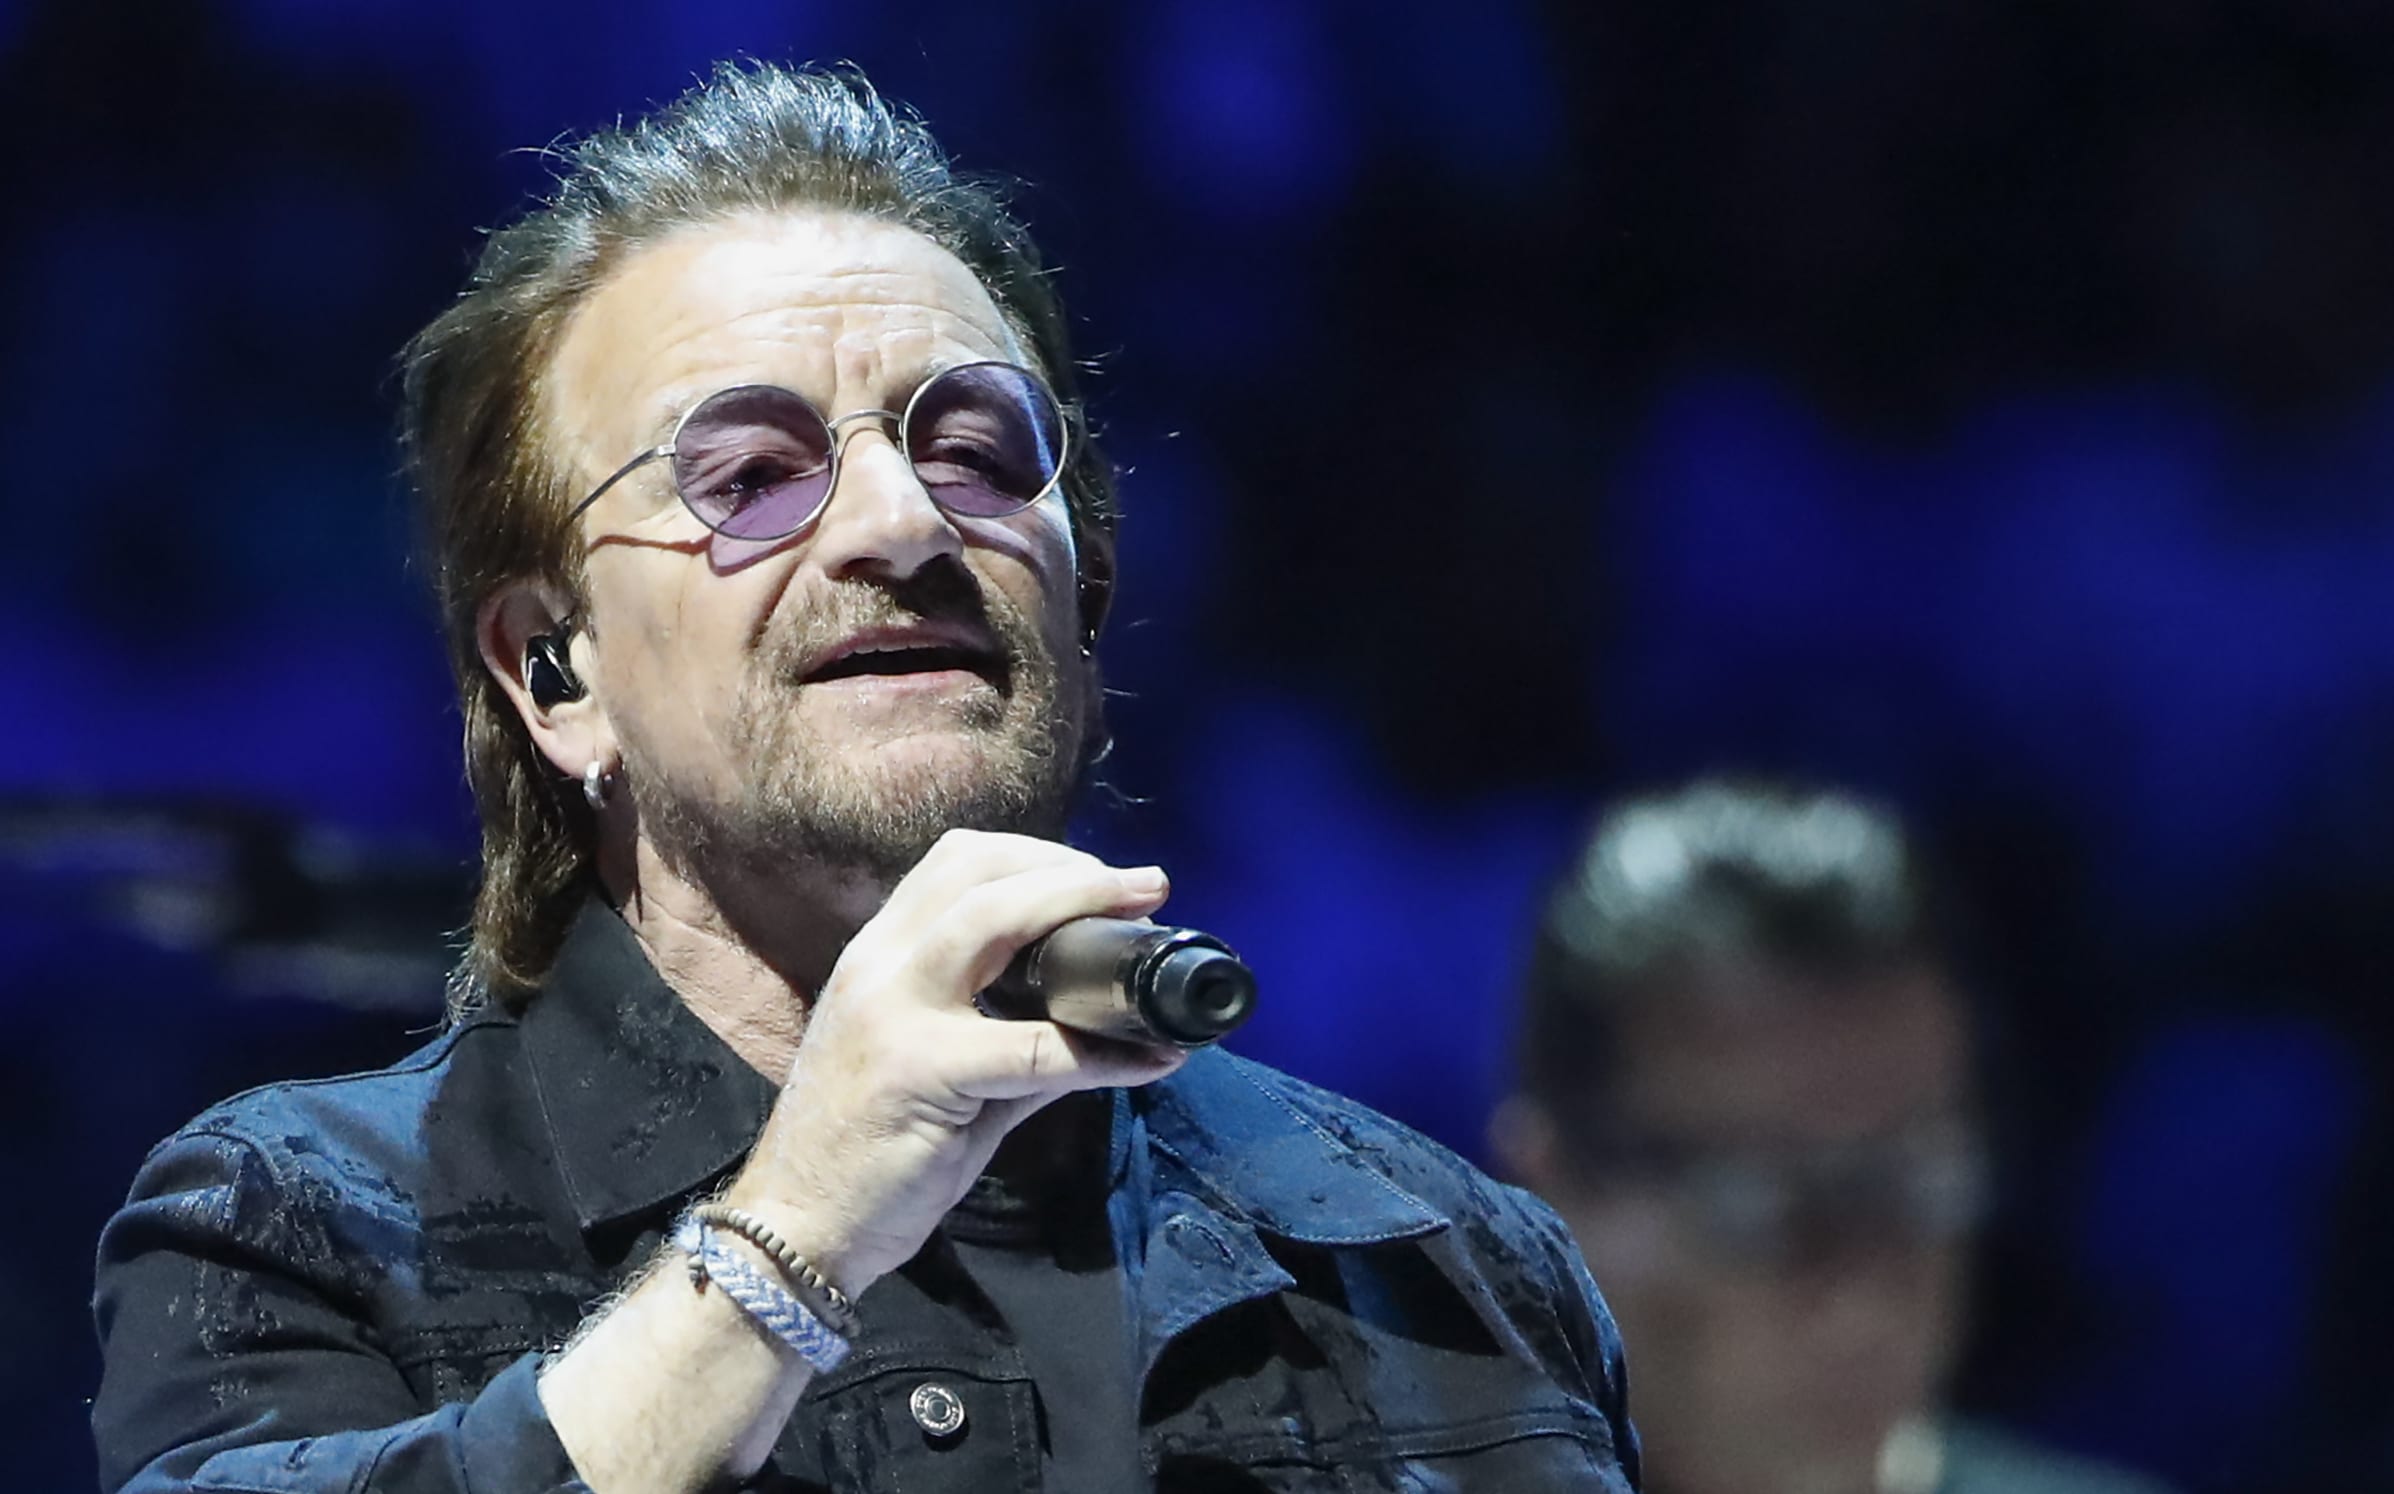 Bono of the Irish rock band U2 performs during the "Experience + Innocence" tour at the United Center in Chicago on May 23, 2018. / AFP PHOTO / Kamil Krzaczynski